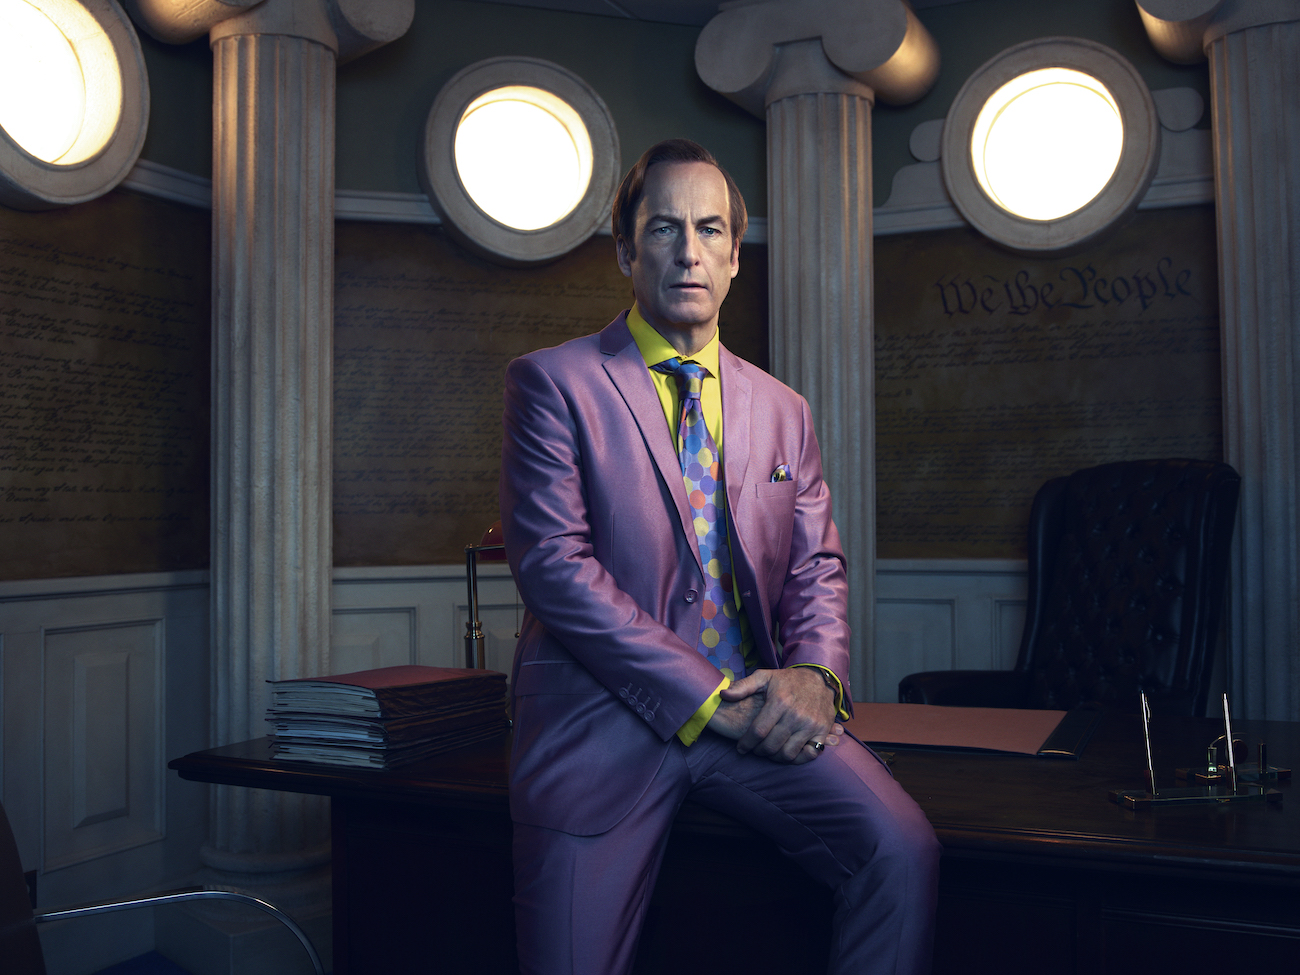 Saul Goodman (Bob Odenkirk) sits on the desk of his office